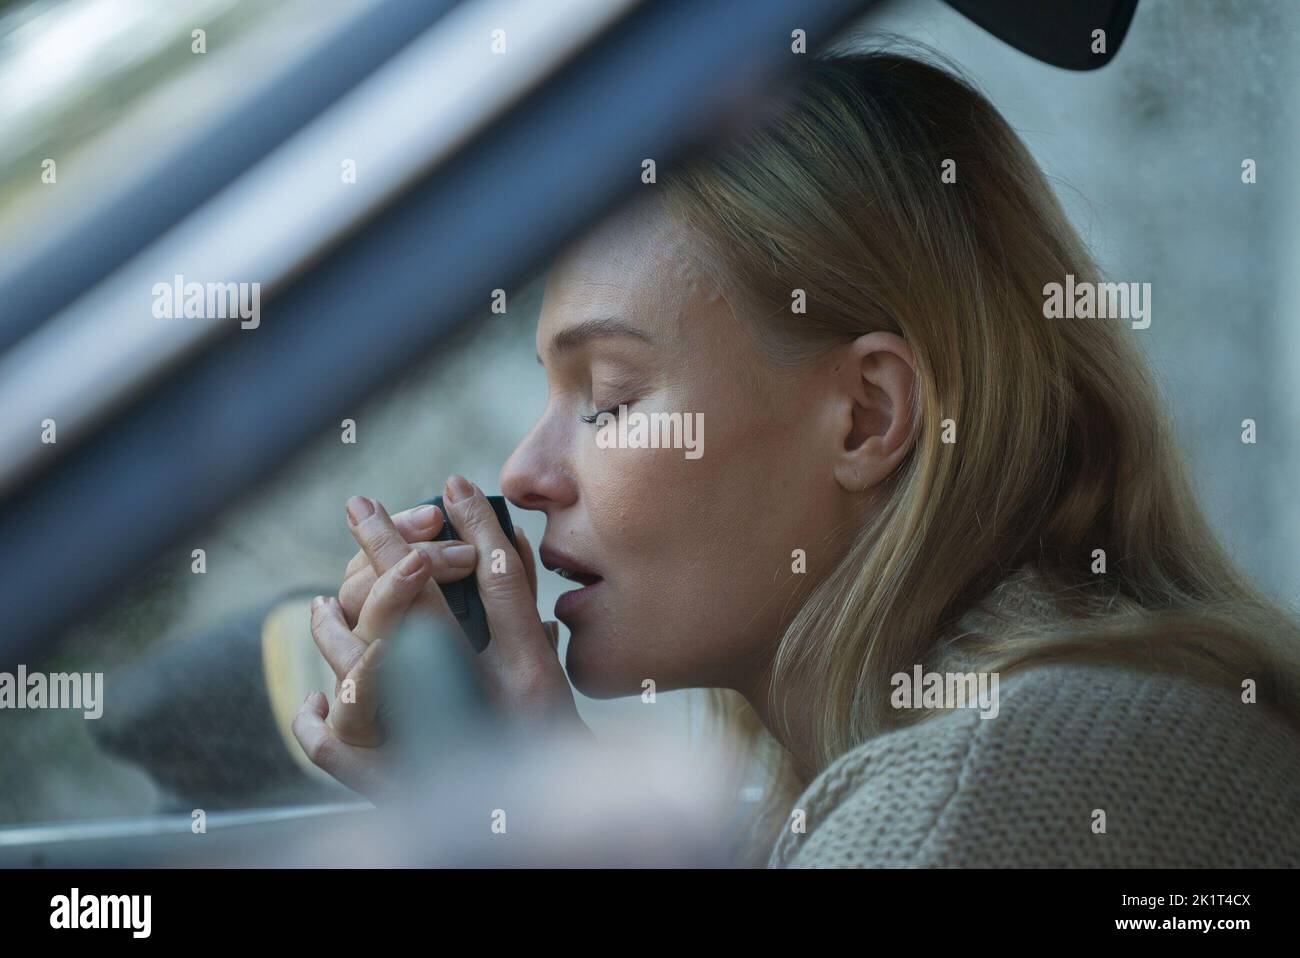 KATE BOSWORTH in THE DOMESTICS, directed by MIKE P. NELSON. Credit: Hollywood Gang Productions / Album Stock Photo